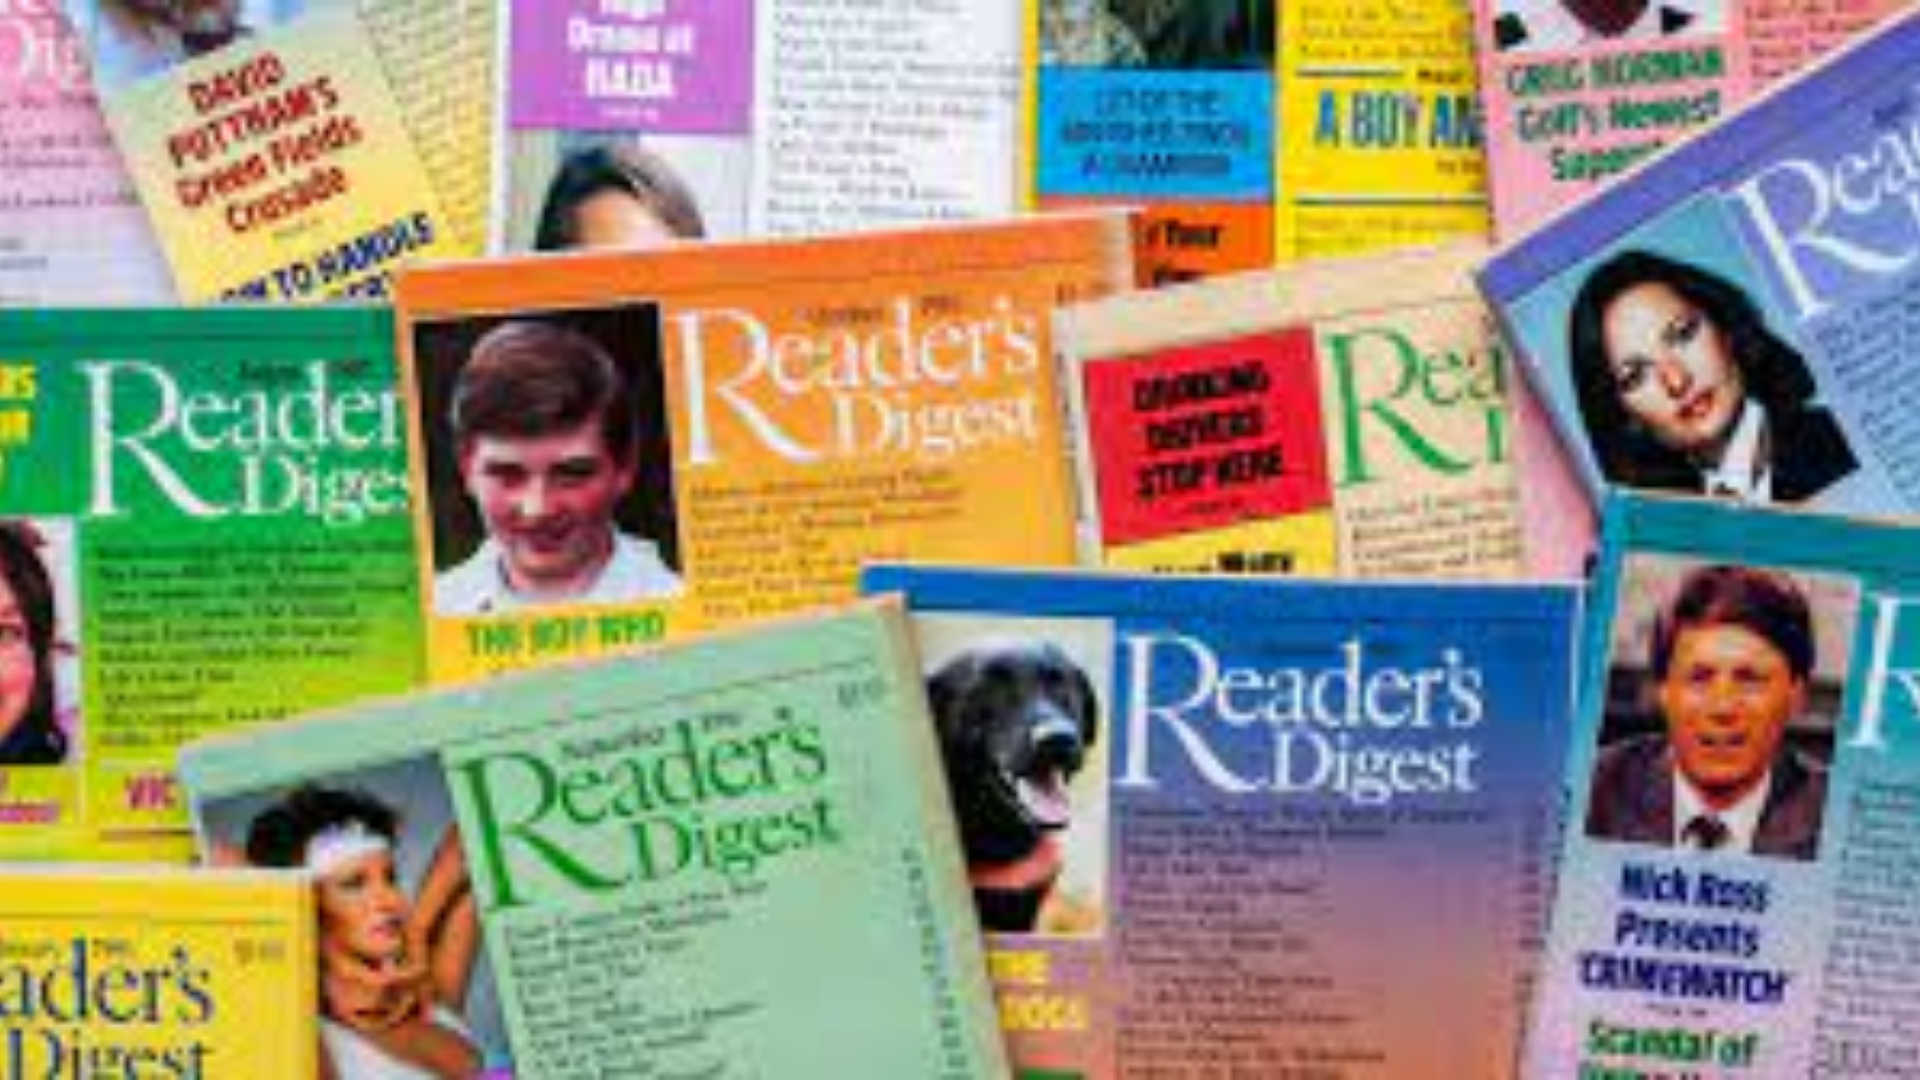 What happened to Reader’s Digest?